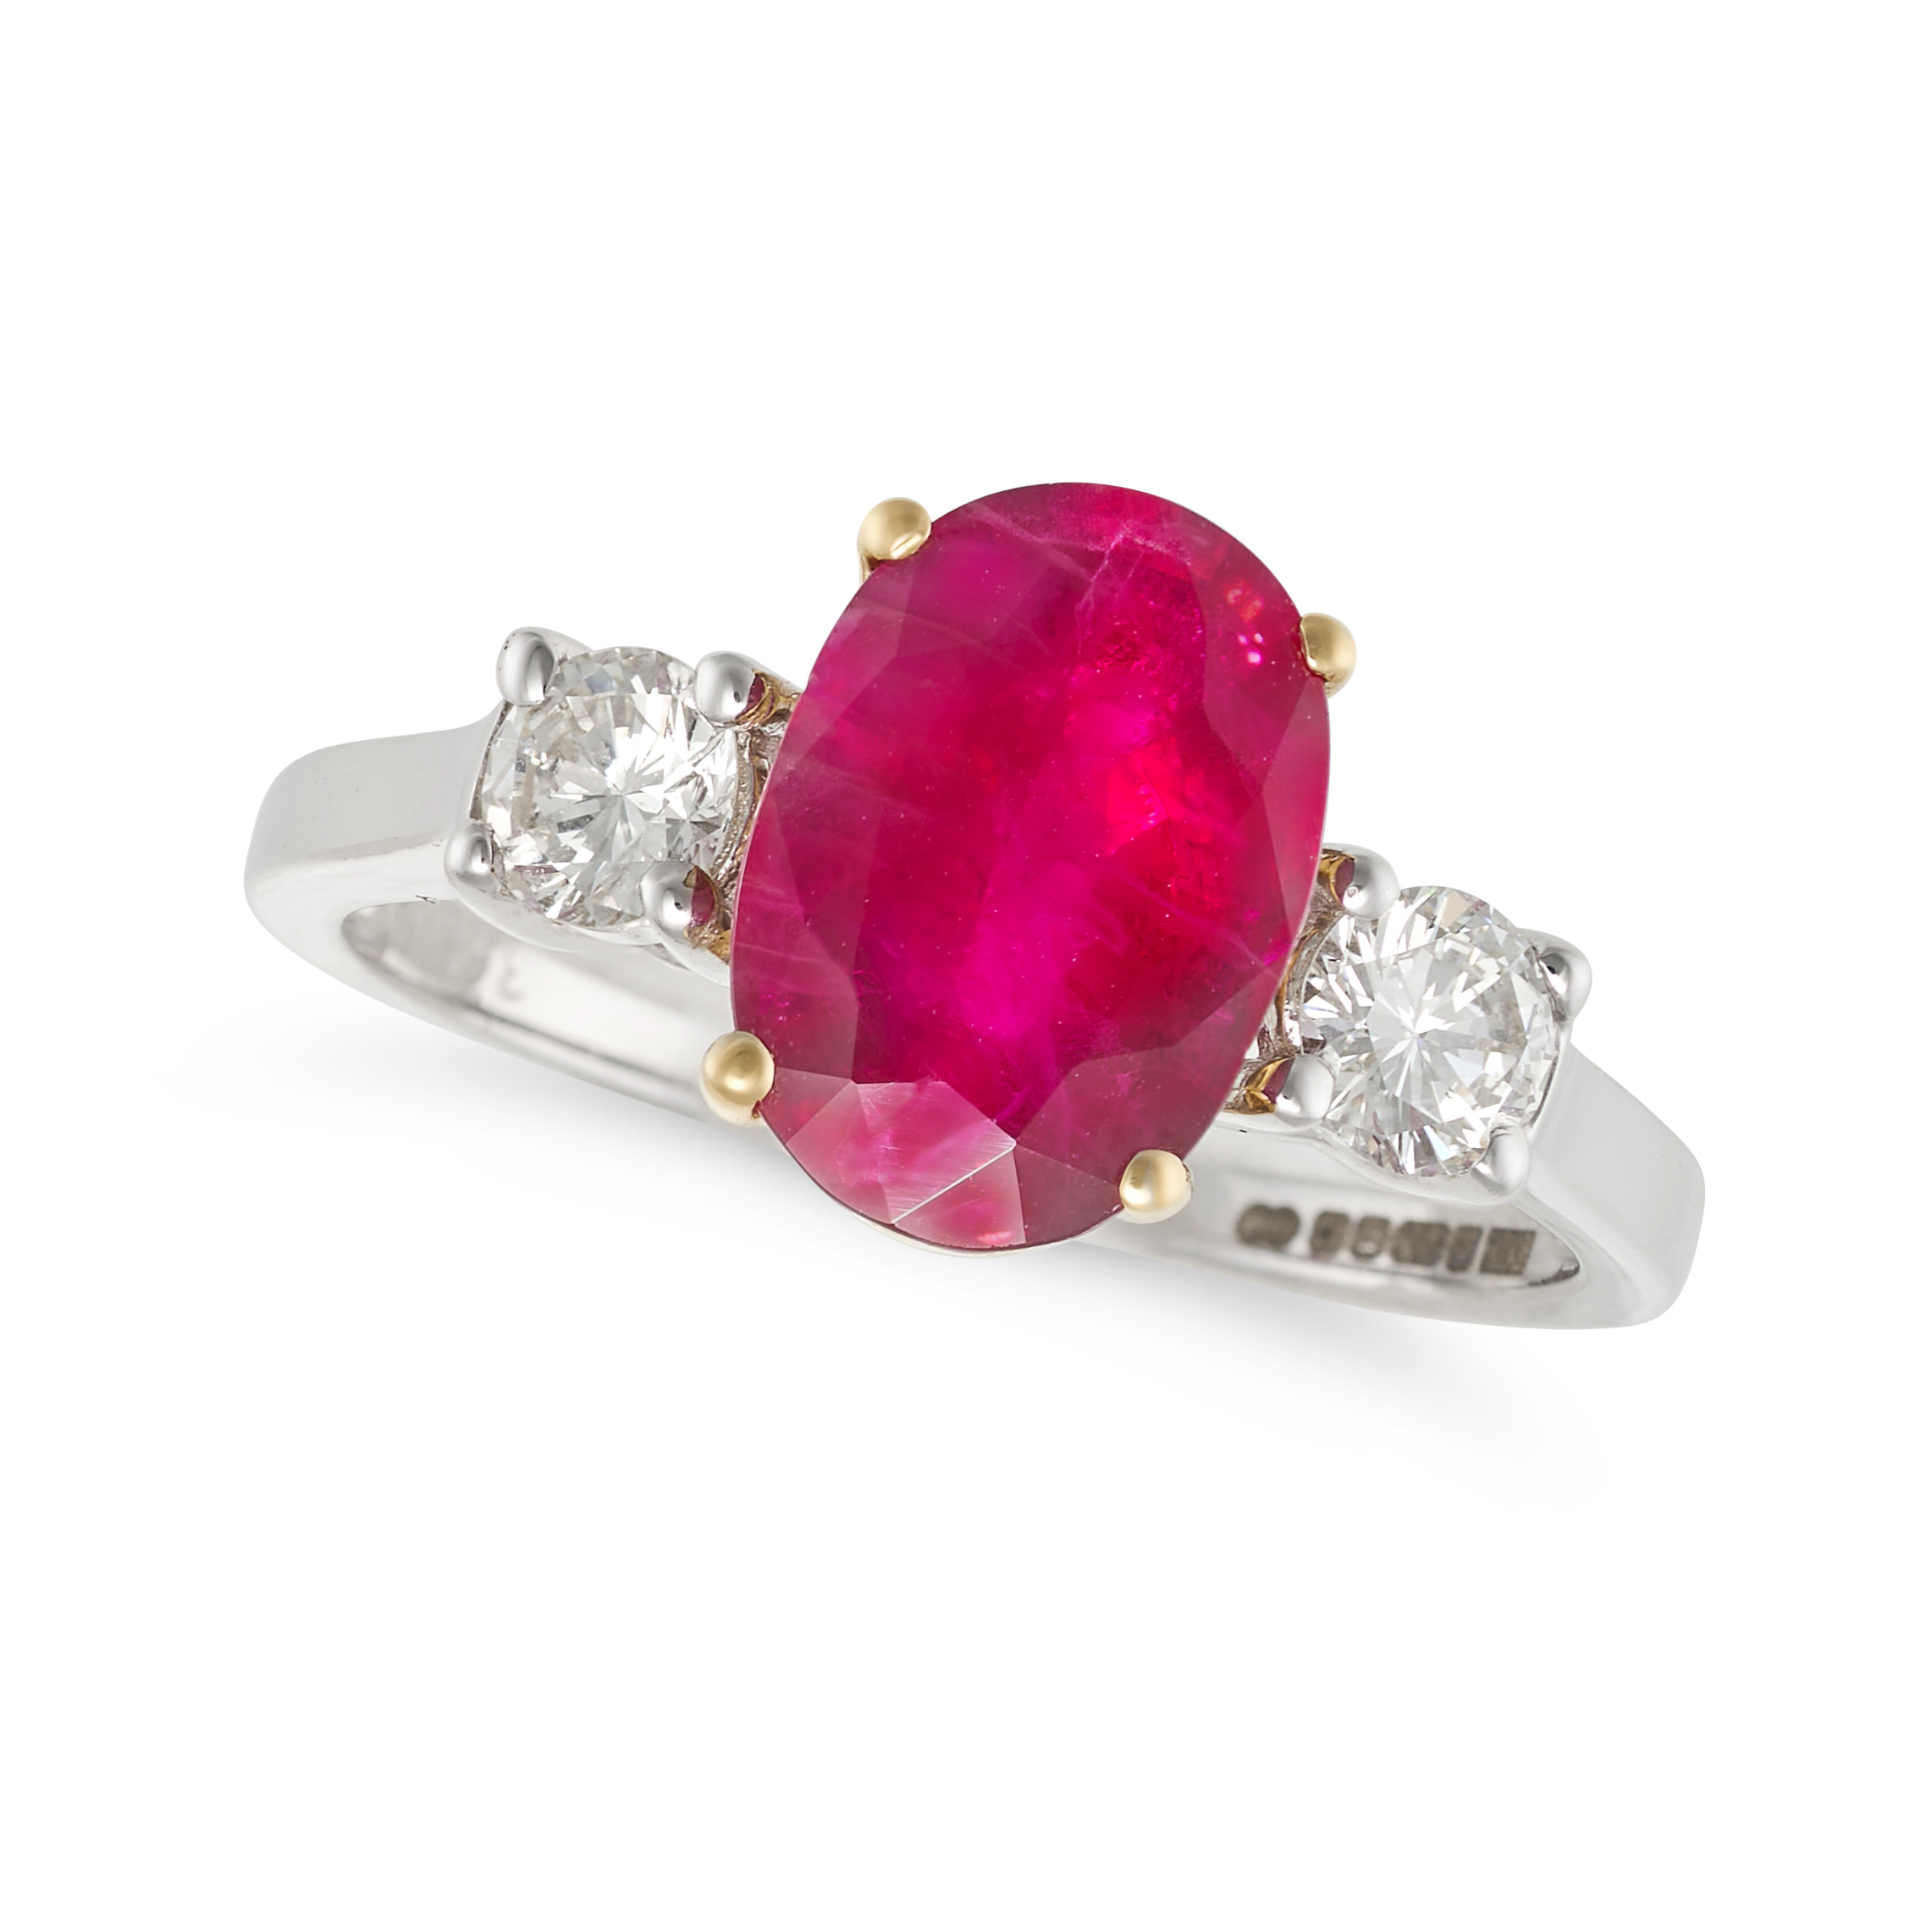 A RUBY AND DIAMOND THREE STONE RING in 18ct white gold, set with an oval cut ruby of approximatel...